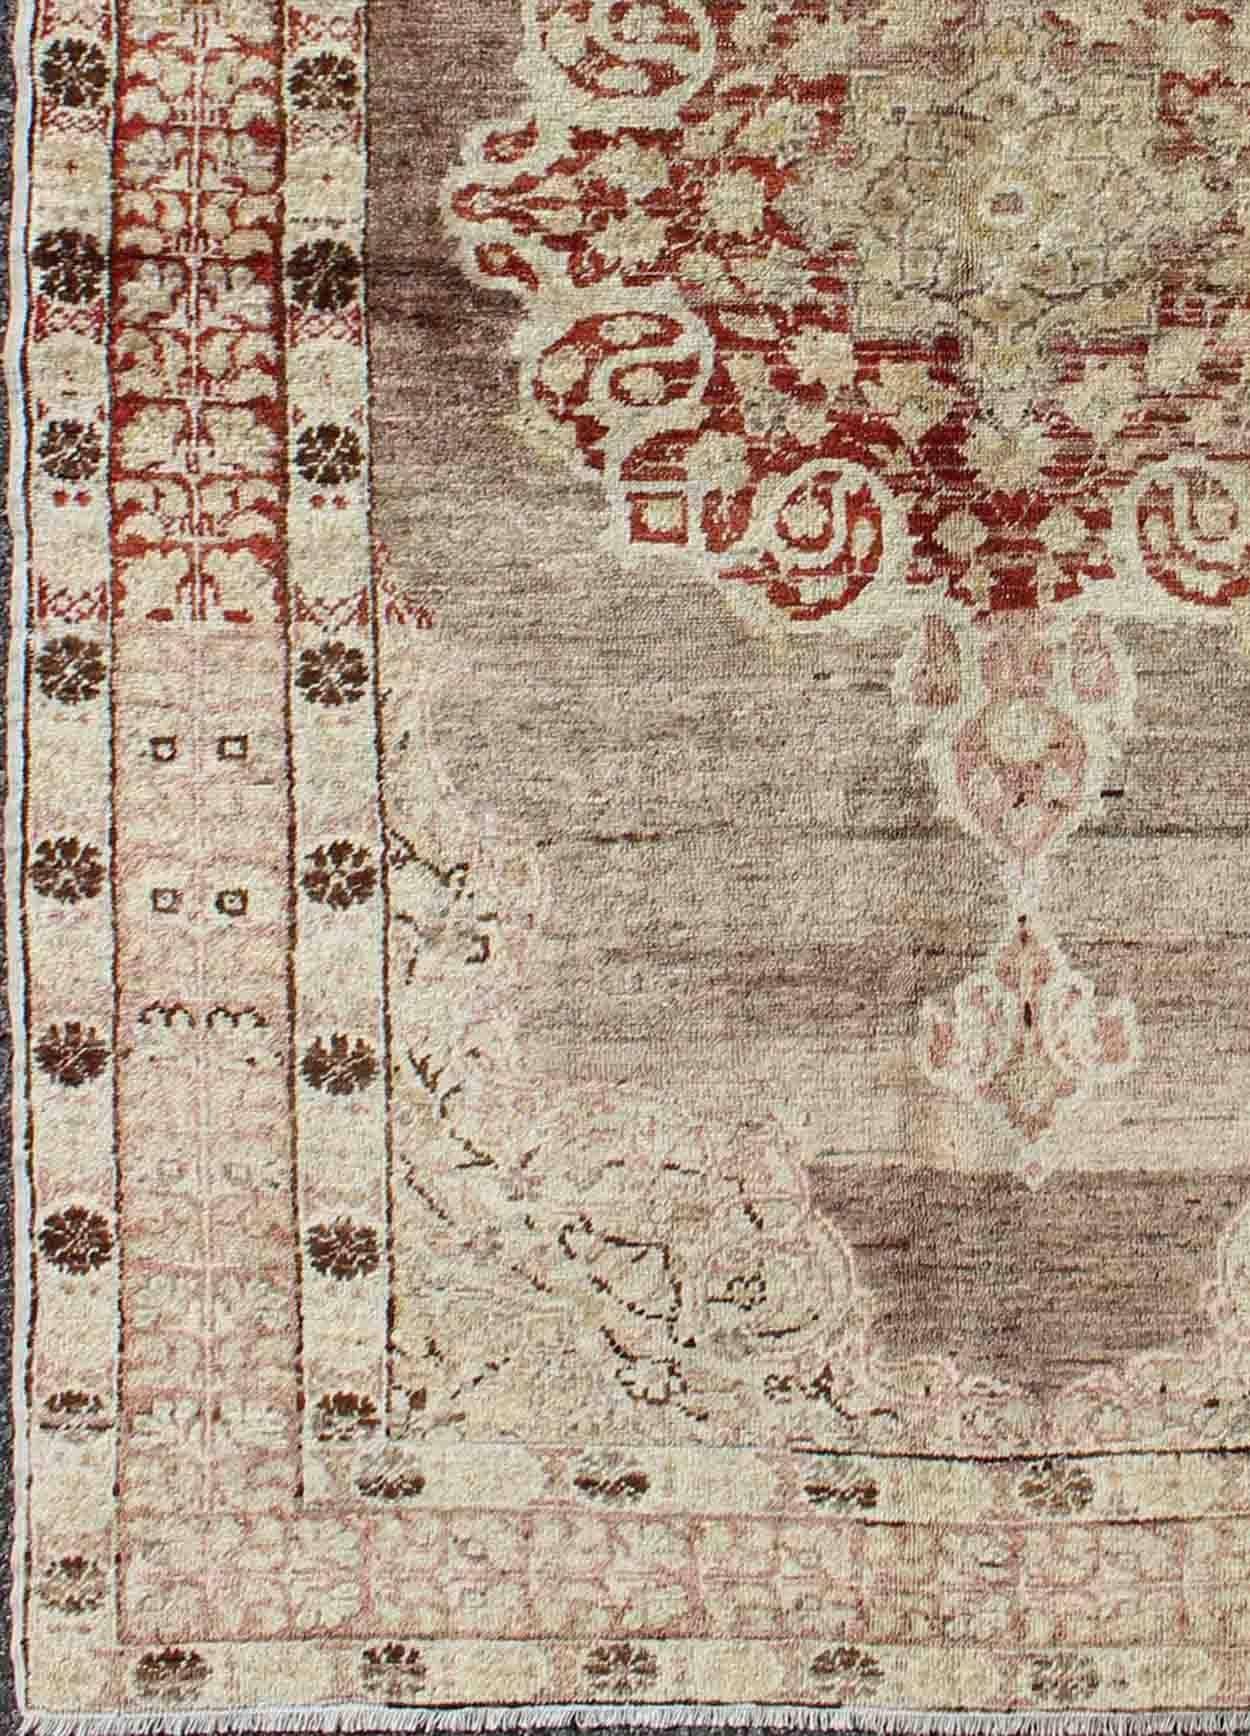  Oushak Vintage Rug with Aubergine with Center Medallion
rug/na-34,  origin/turkey

This spectacular Vintage Turkish Oushak bears magnificent splendor indicative of royal tastes, which sought perfection in balance and palette. The center medallion